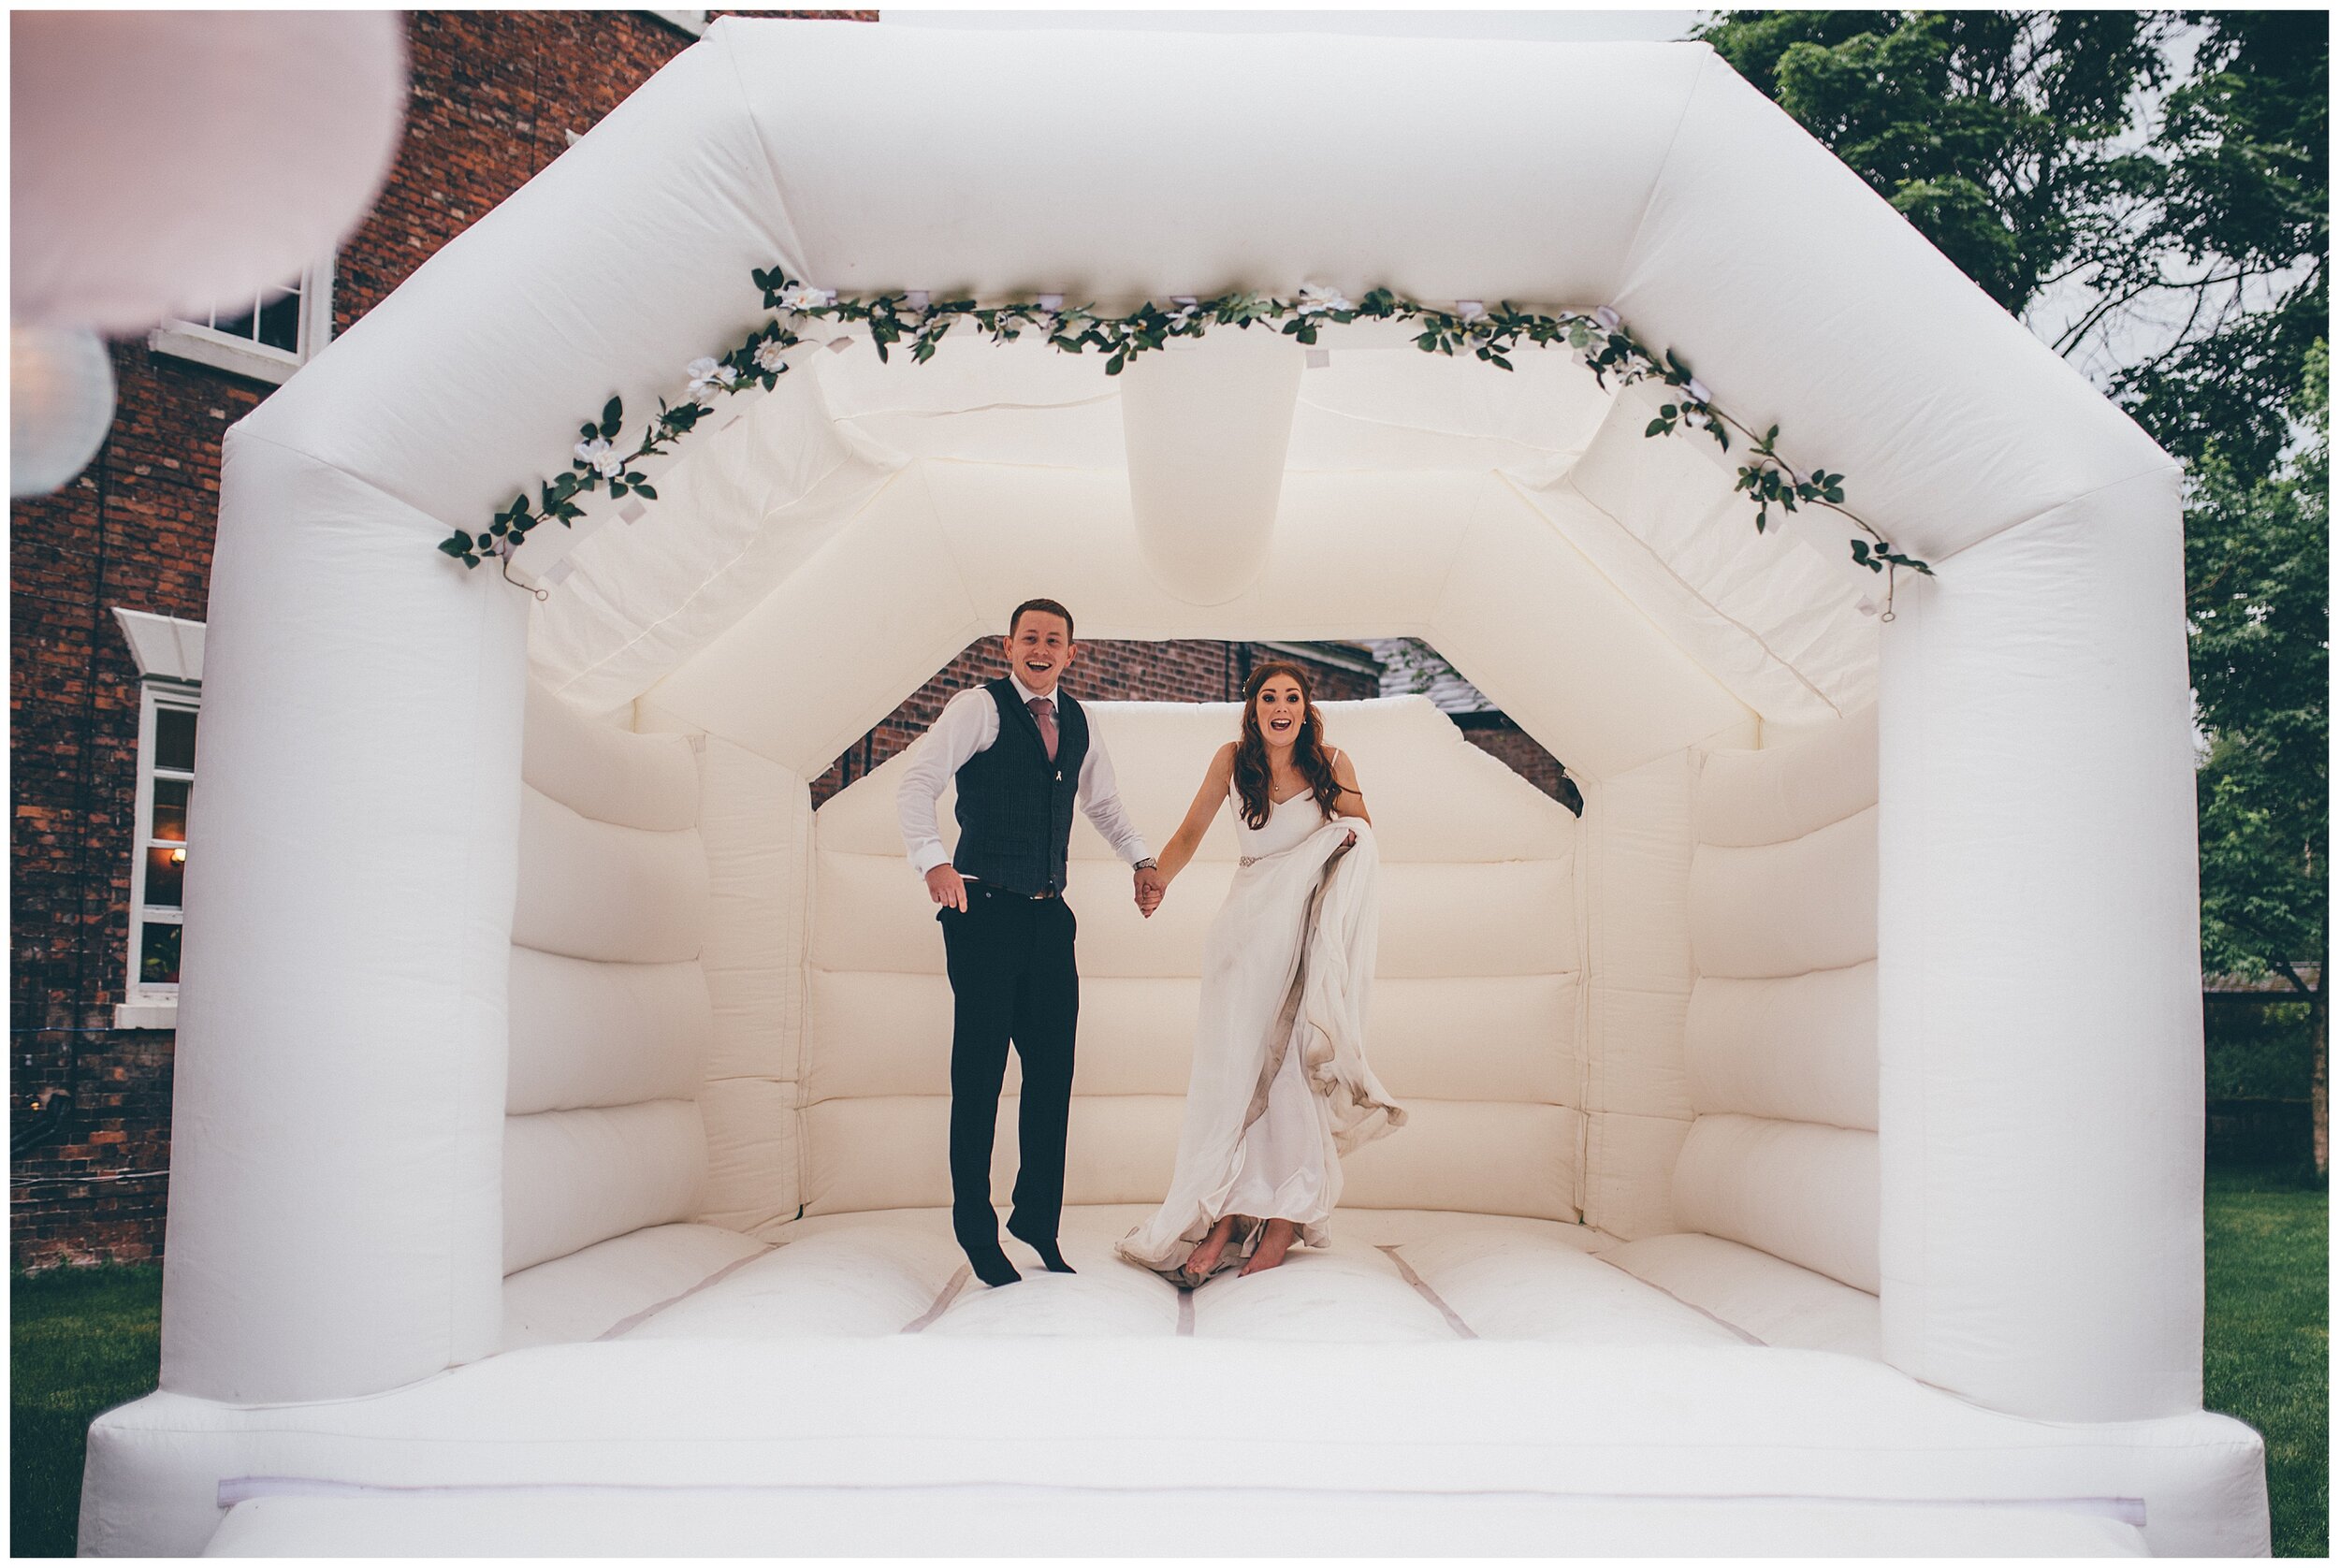 Bride and groom bounce on their bouncy castle during their festival themed wedding in Cheshire.